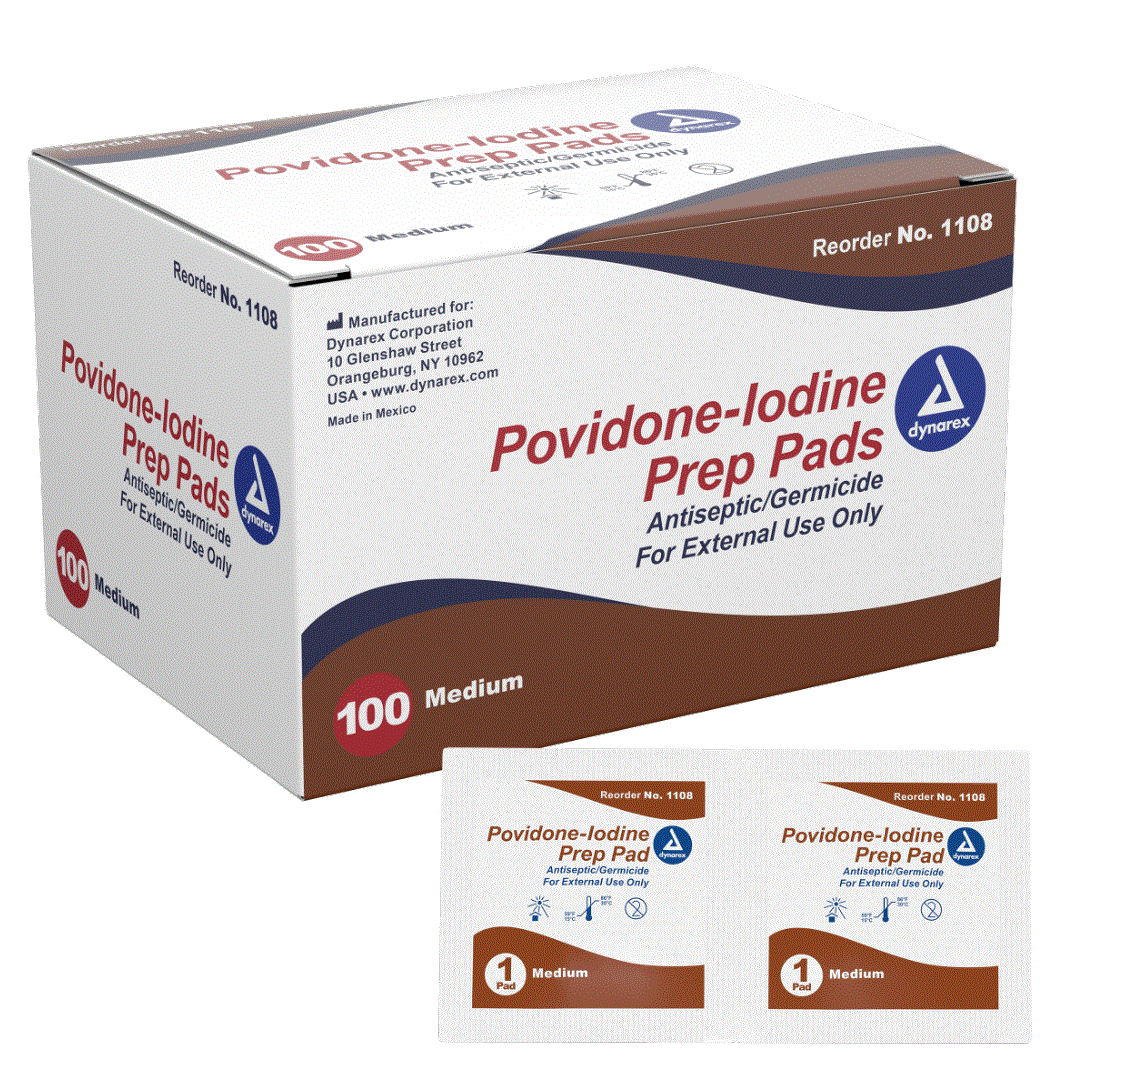 Povidone Prep Pads Products, Supplies and Equipment